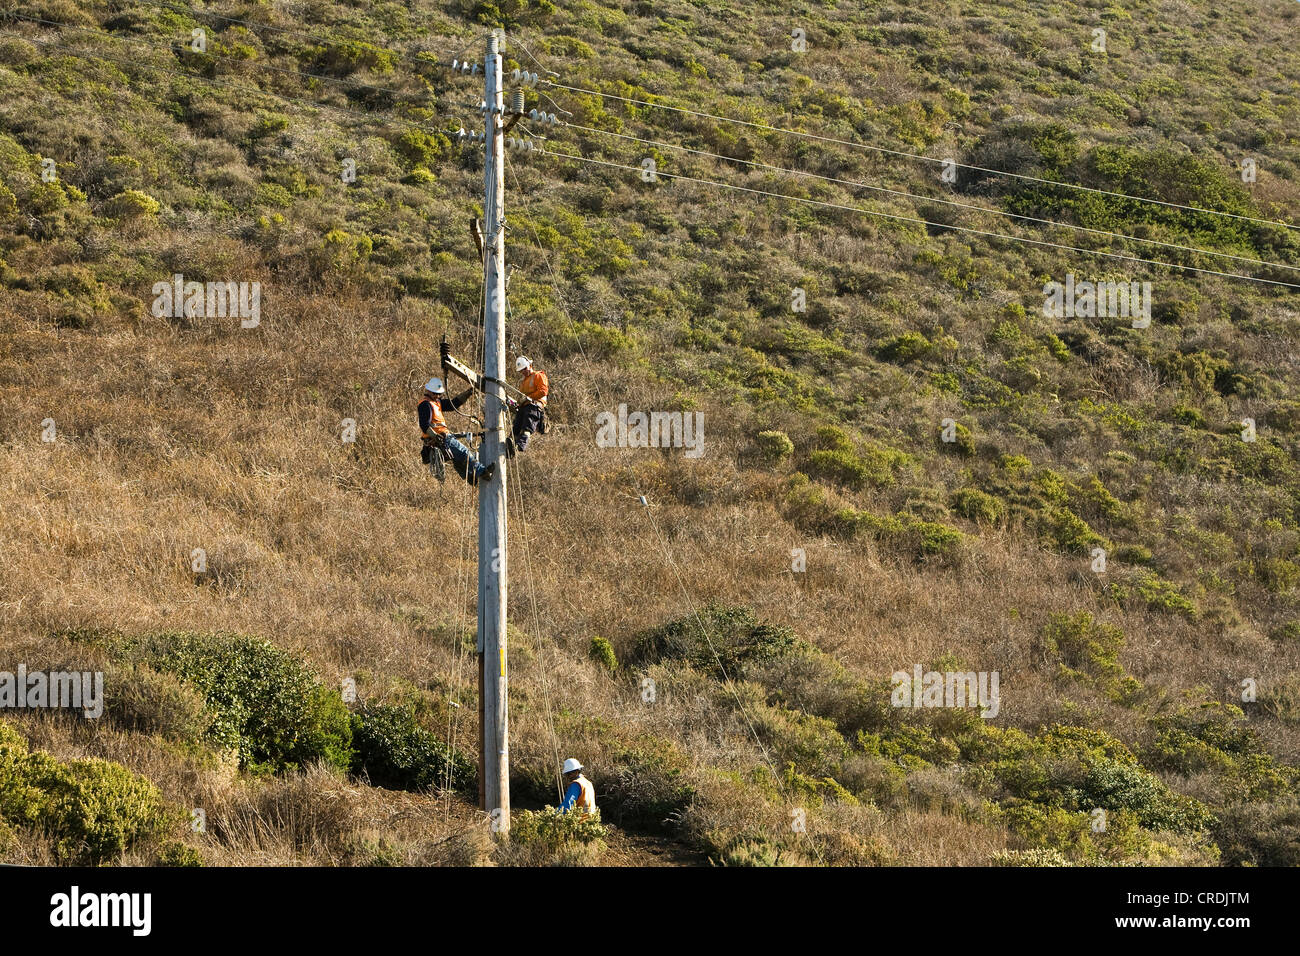 Workers of the PG&E power company working on a pylon, Big Sur, California, USA Stock Photo